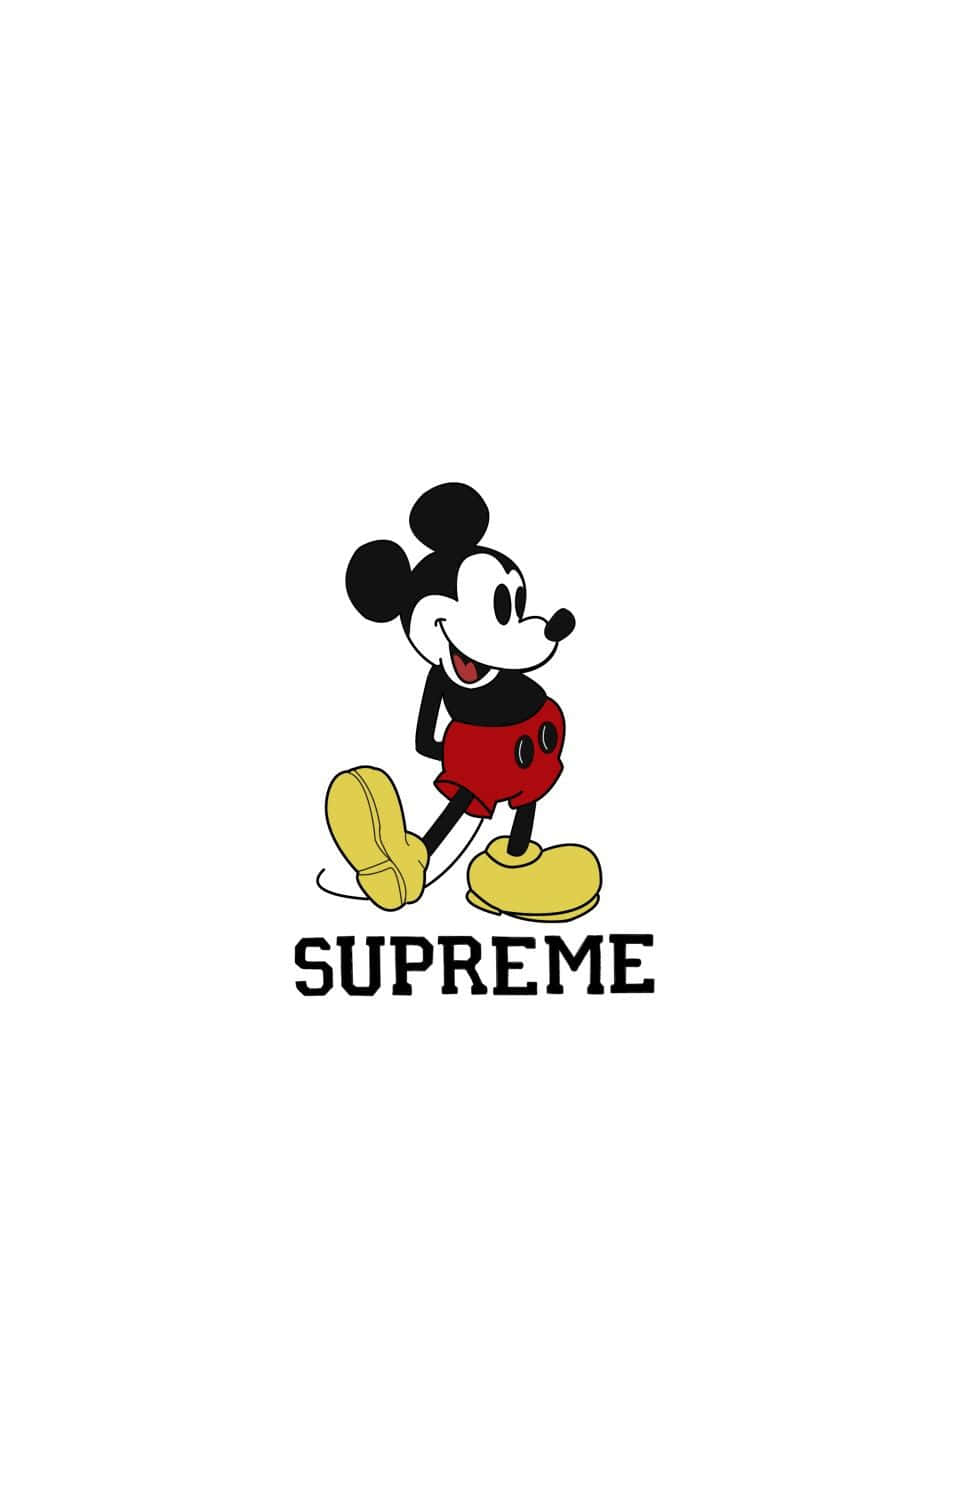 Check out Supreme Mickey Mouse's explosive new look Wallpaper